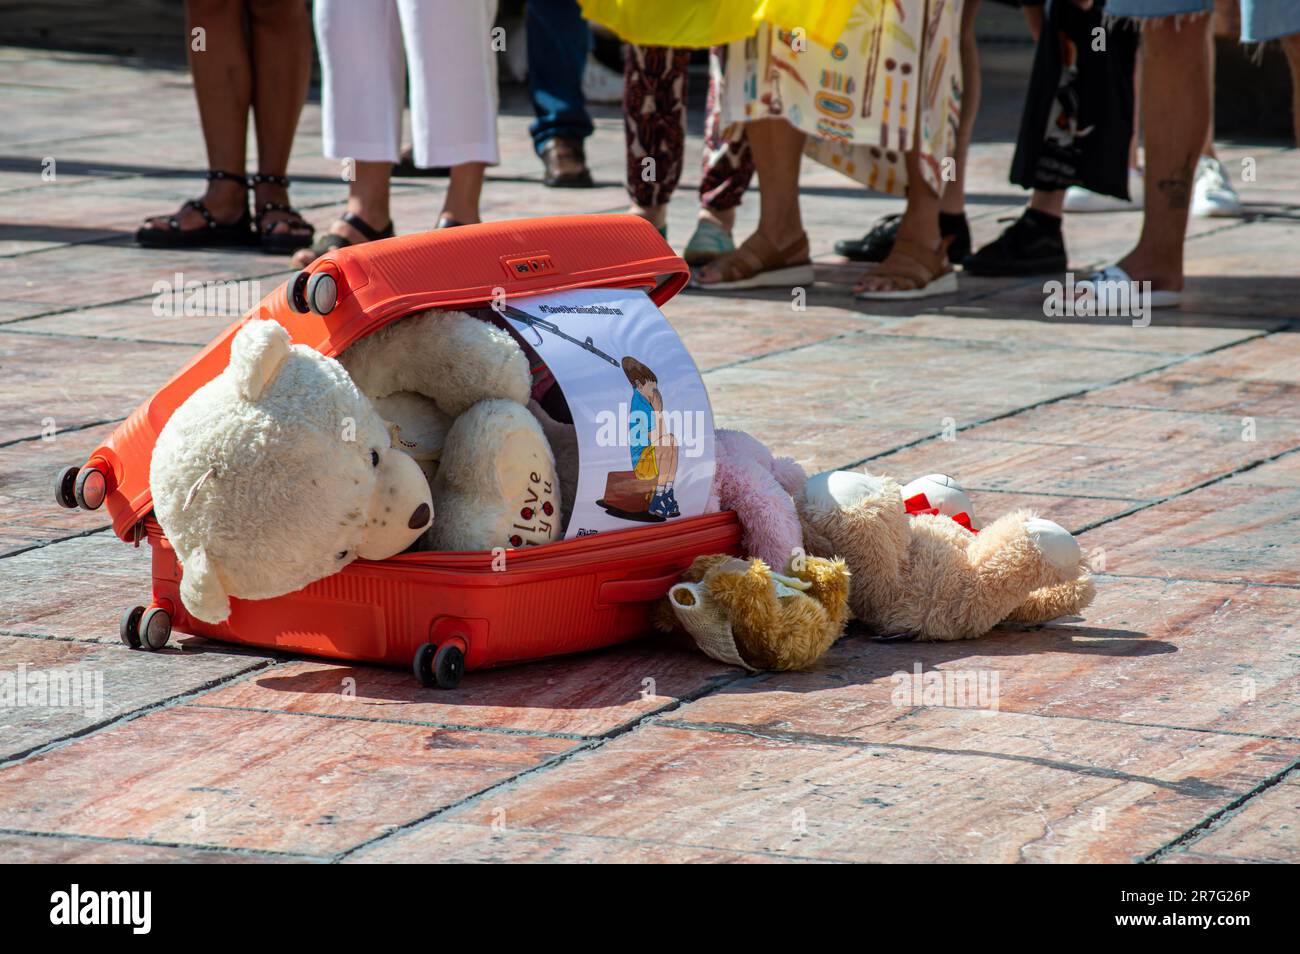 MALAGA, SPAIN - June 6, 2023: Toys in suitcase - support Ukraine children from russian argession on Constitution square in Malaga, Spain on June 6, 20 Stock Photo